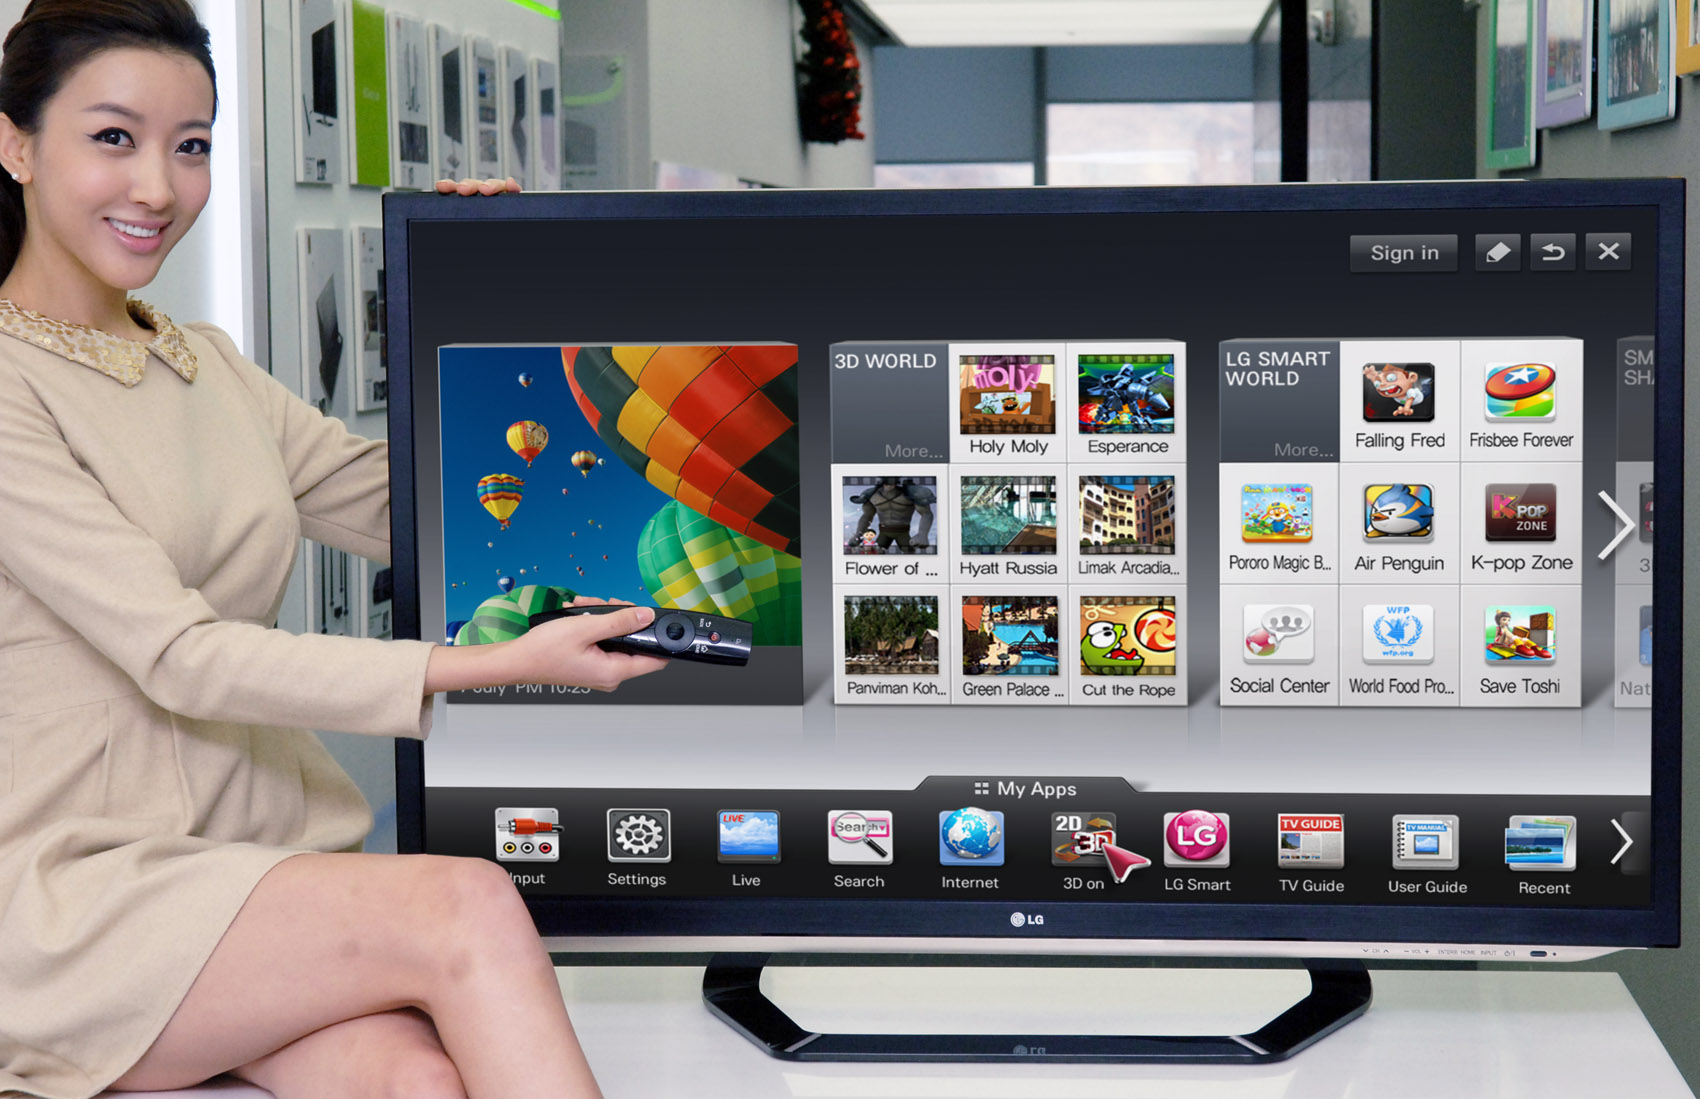 A model is demonstrating the newest Smart TV features with a 2012 LG CINEMA 3D Smart TV